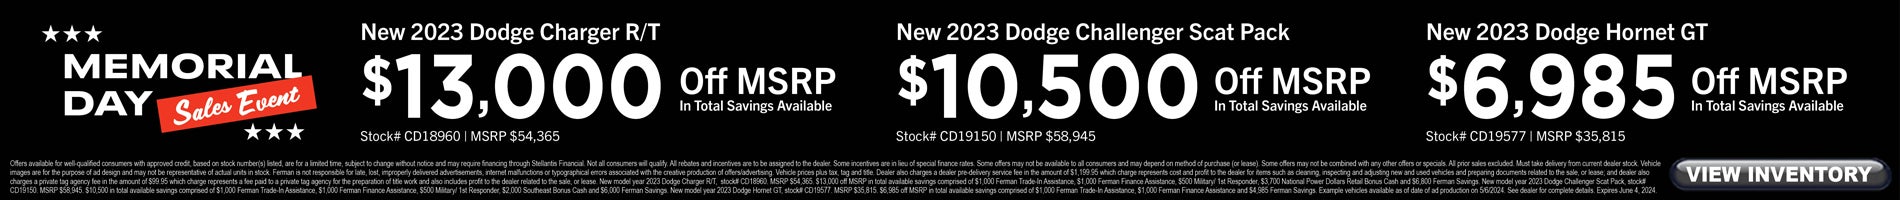 May Savings on New Dodge Hornet, Challenger and Charger